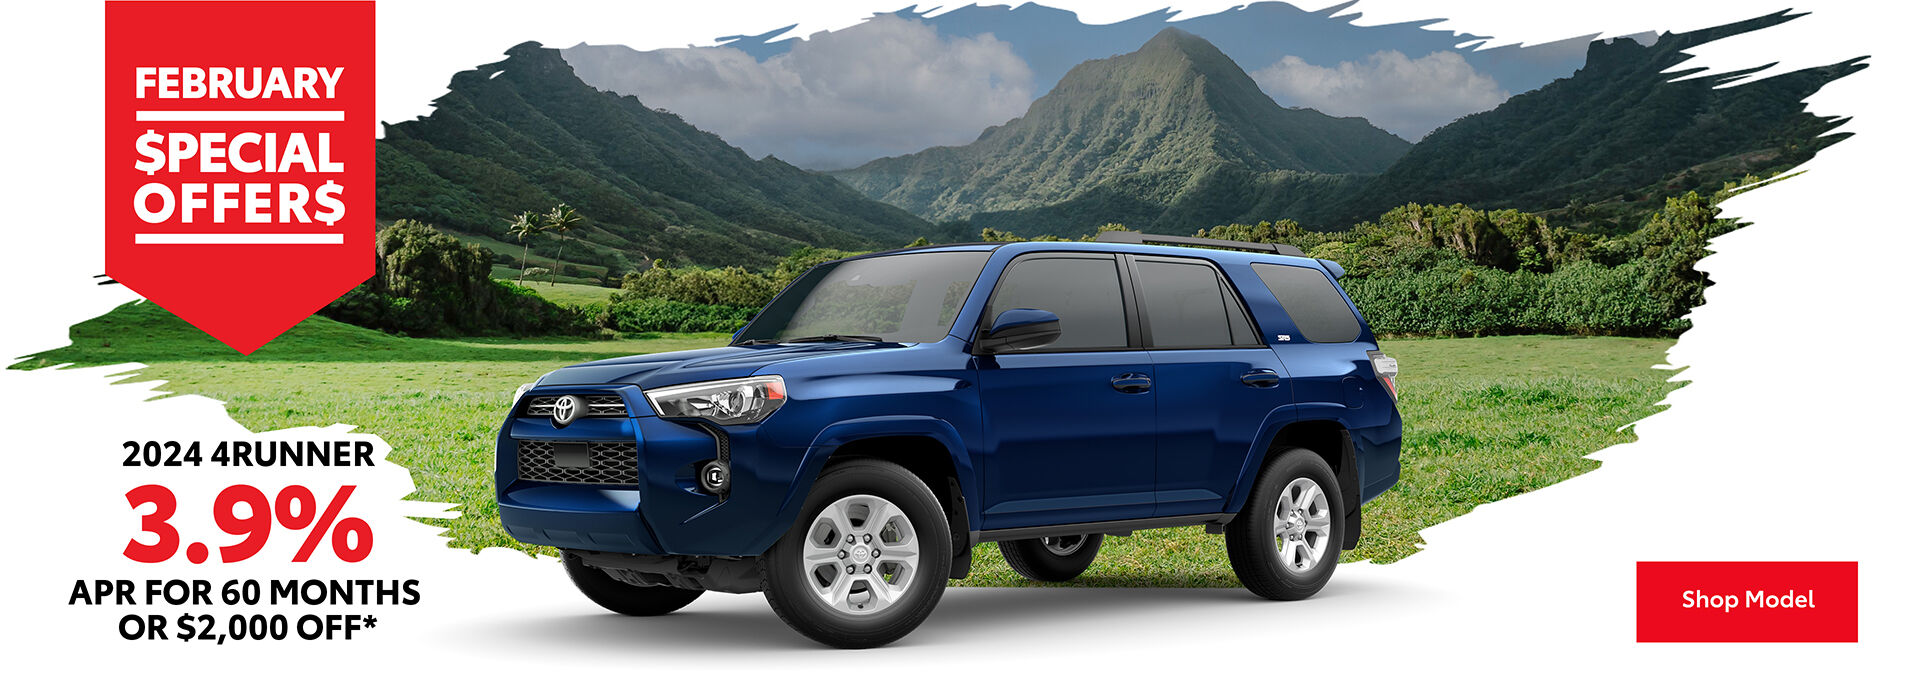 February Specials - 3.9% APR for 60 months or $2,000 off a 2024 4Runner